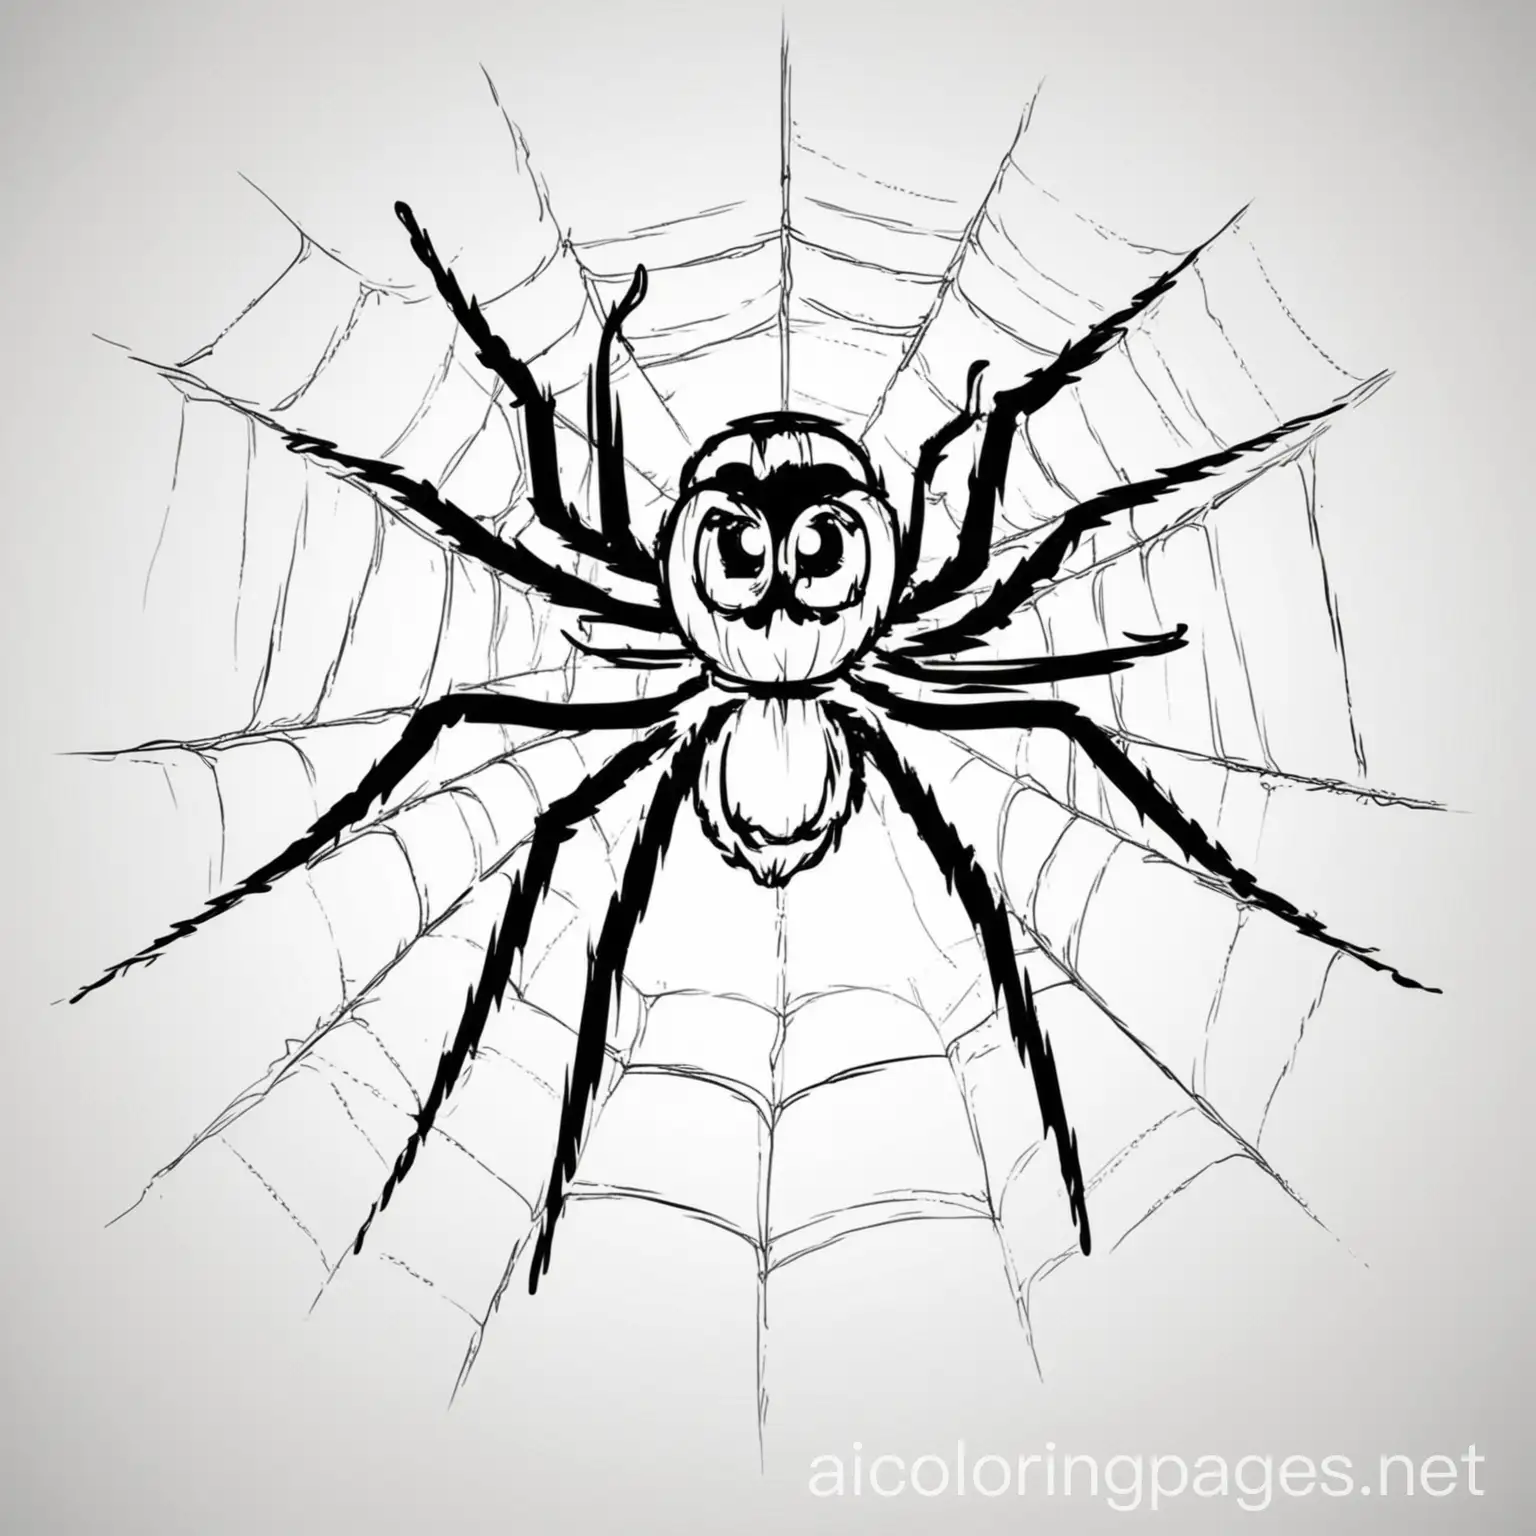 spider, Coloring Page, black and white, line art, white background, Simplicity, Ample White Space. The background of the coloring page is plain white to make it easy for young children to color within the lines. The outlines of all the subjects are easy to distinguish, making it simple for kids to color without too much difficulty